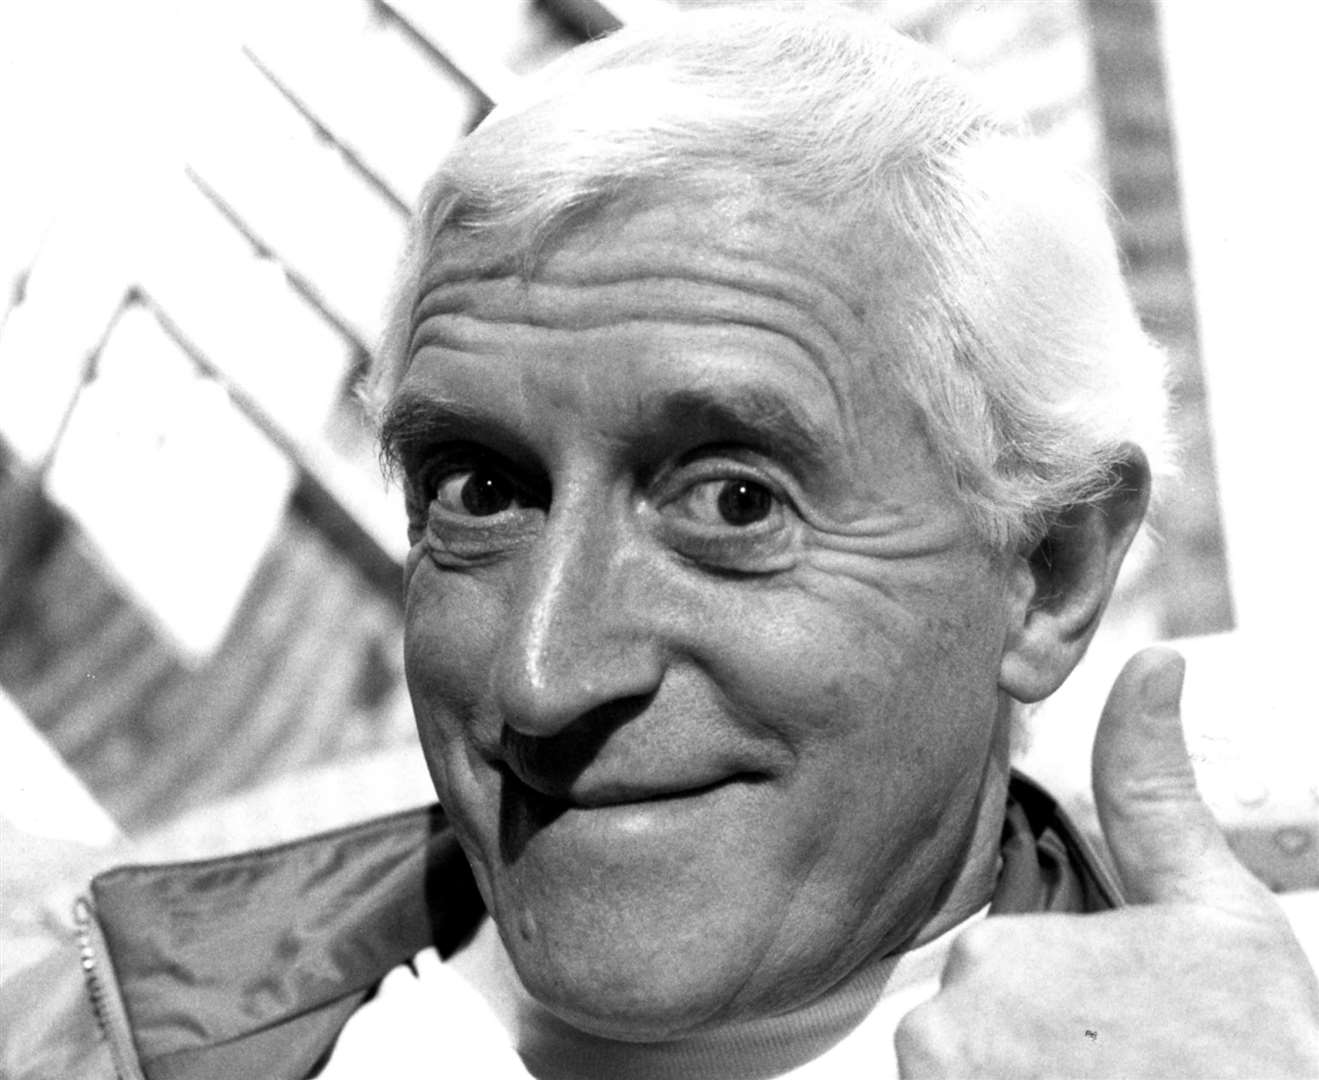 Jim’ll Fix It presenter Jimmy Savile was one of Britain’s most prolific sex offenders. Picture: BBC